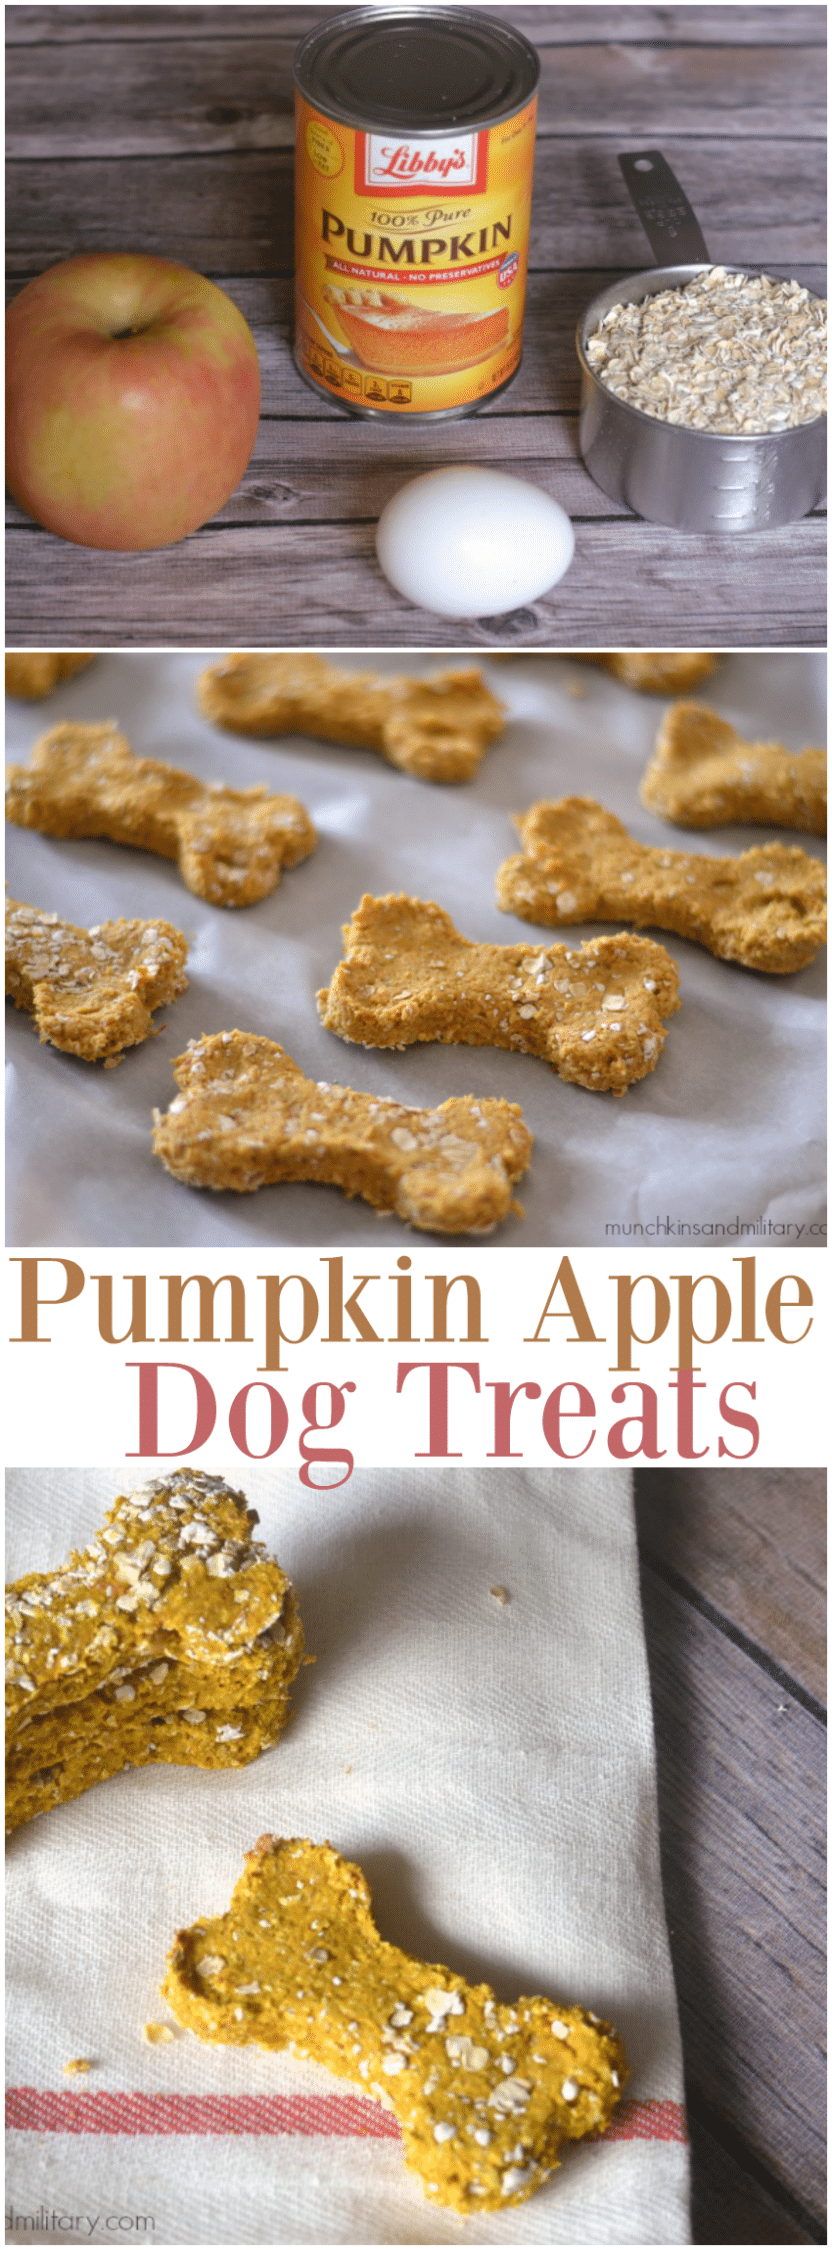 A delicious dog treat made with pumpkin and apple